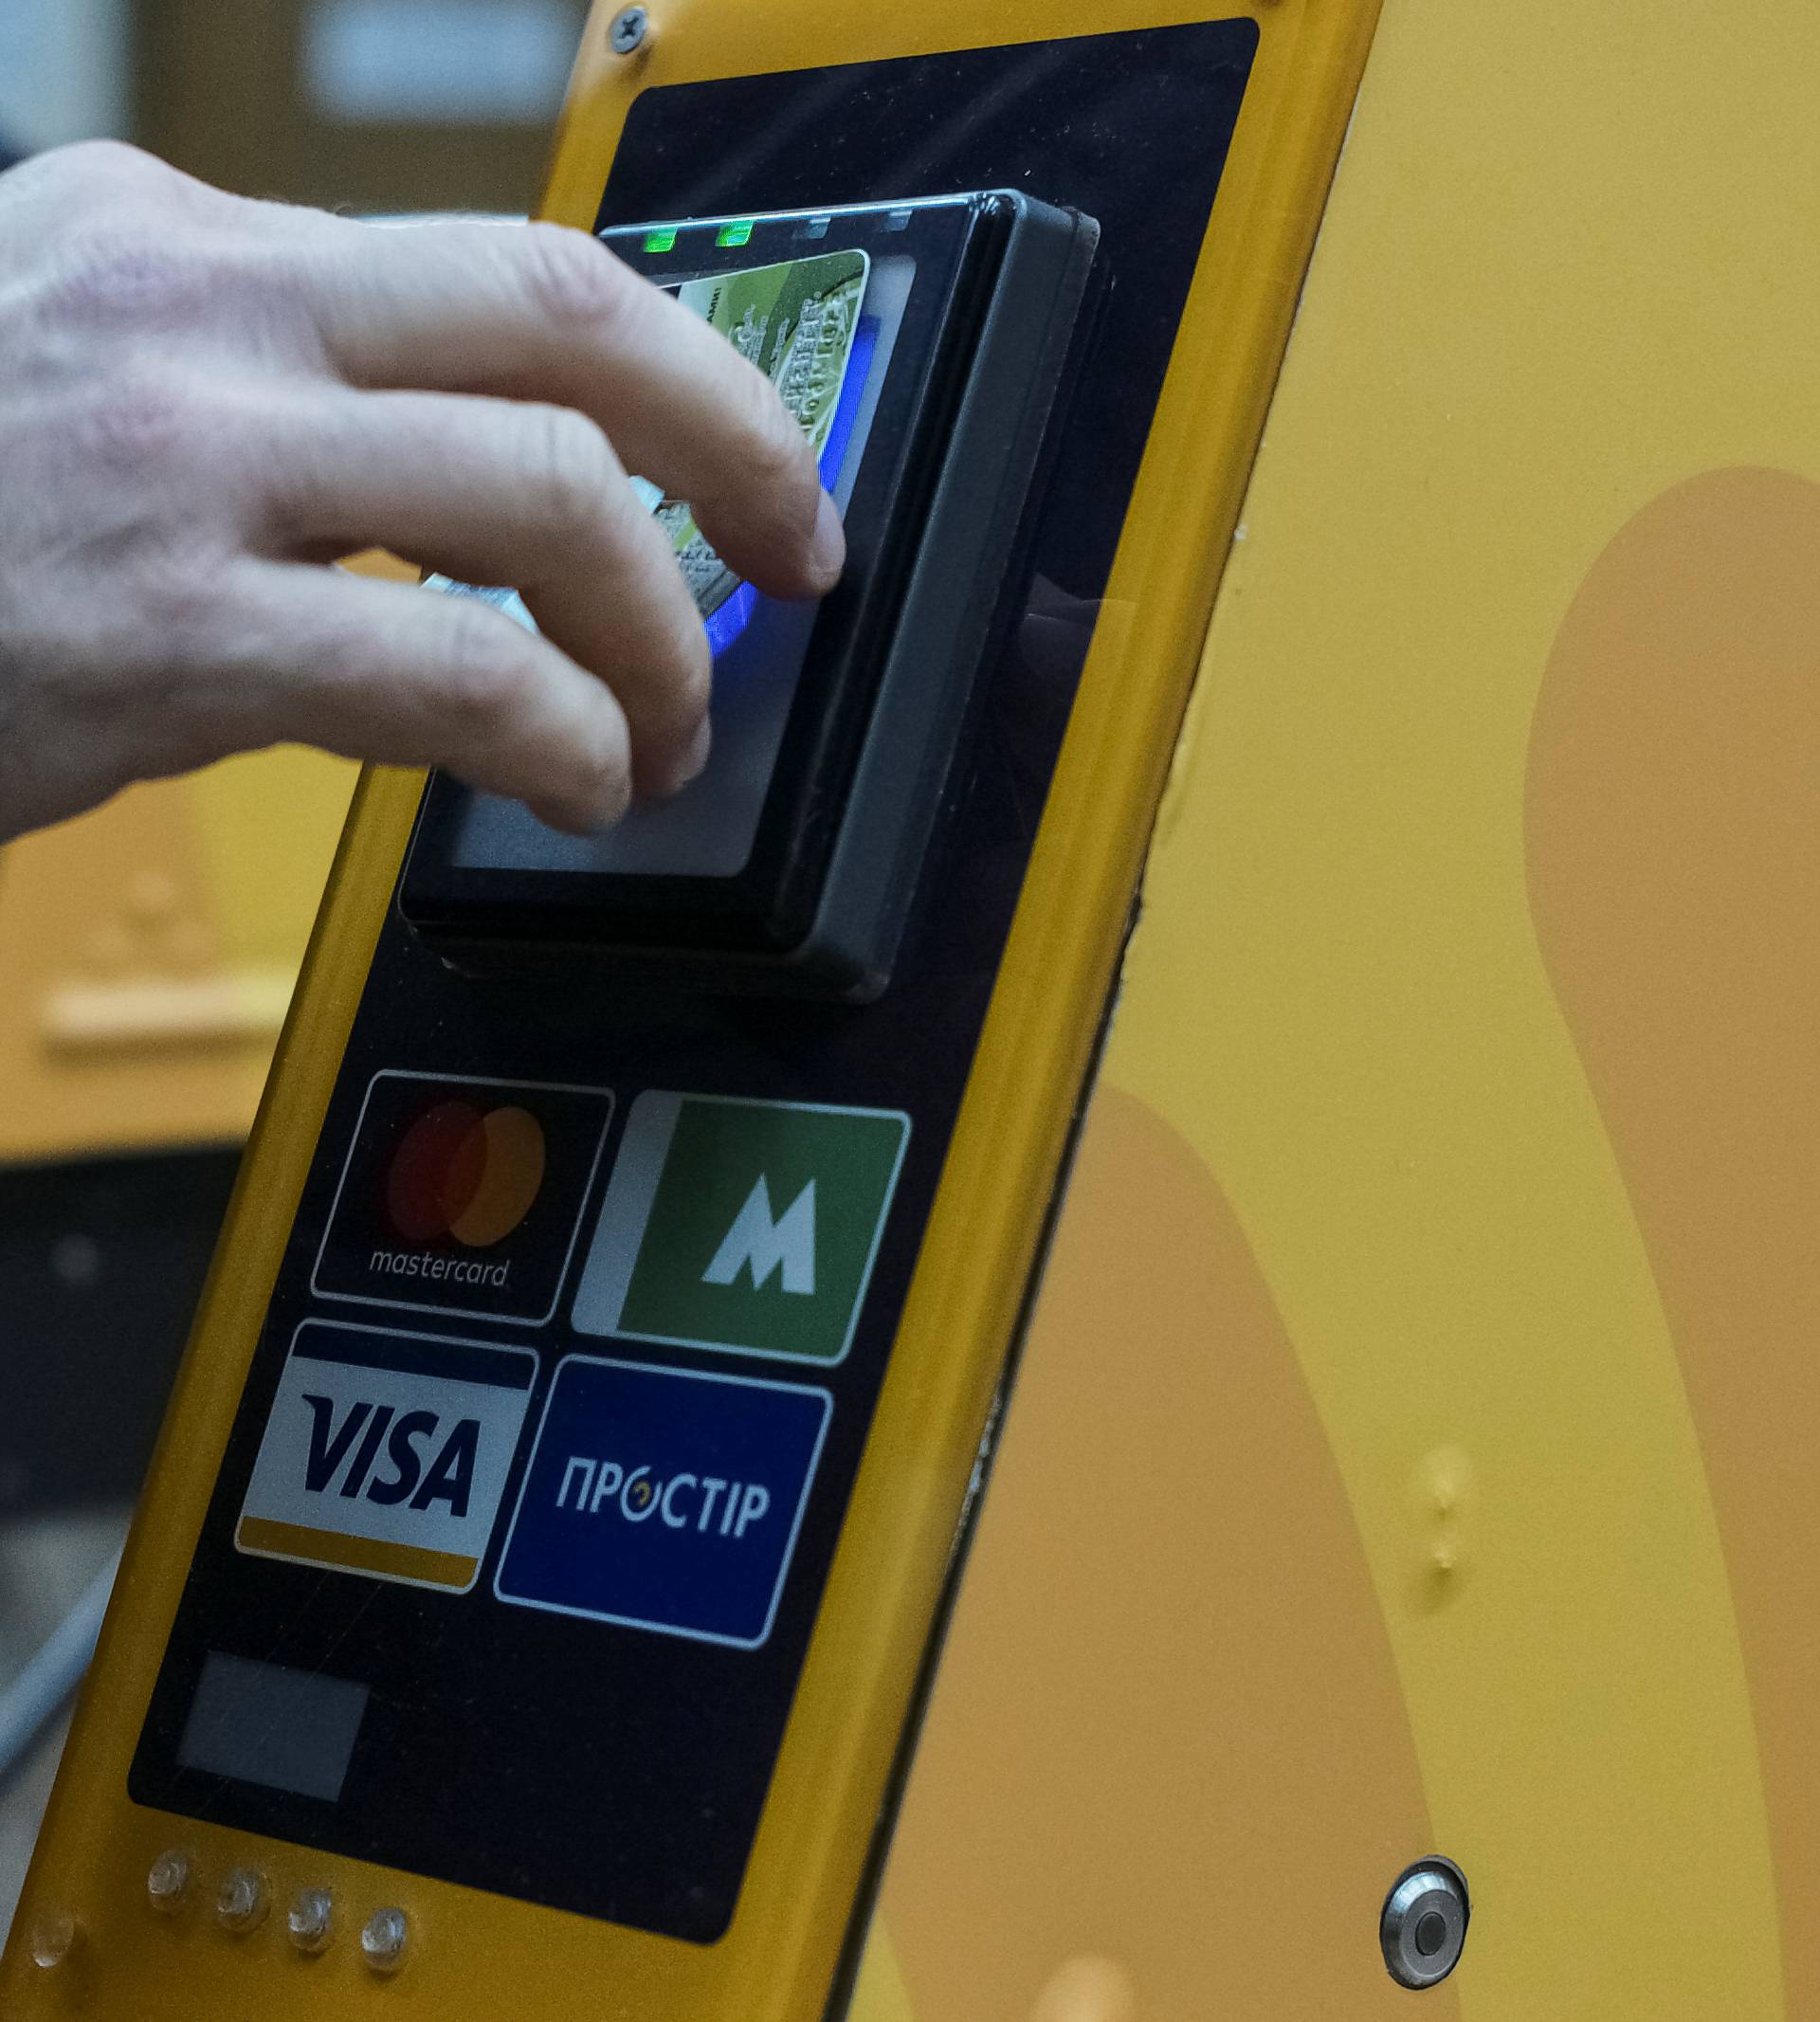 A passenger swipes a bank card against a terminal to ride the subway system in Kiev